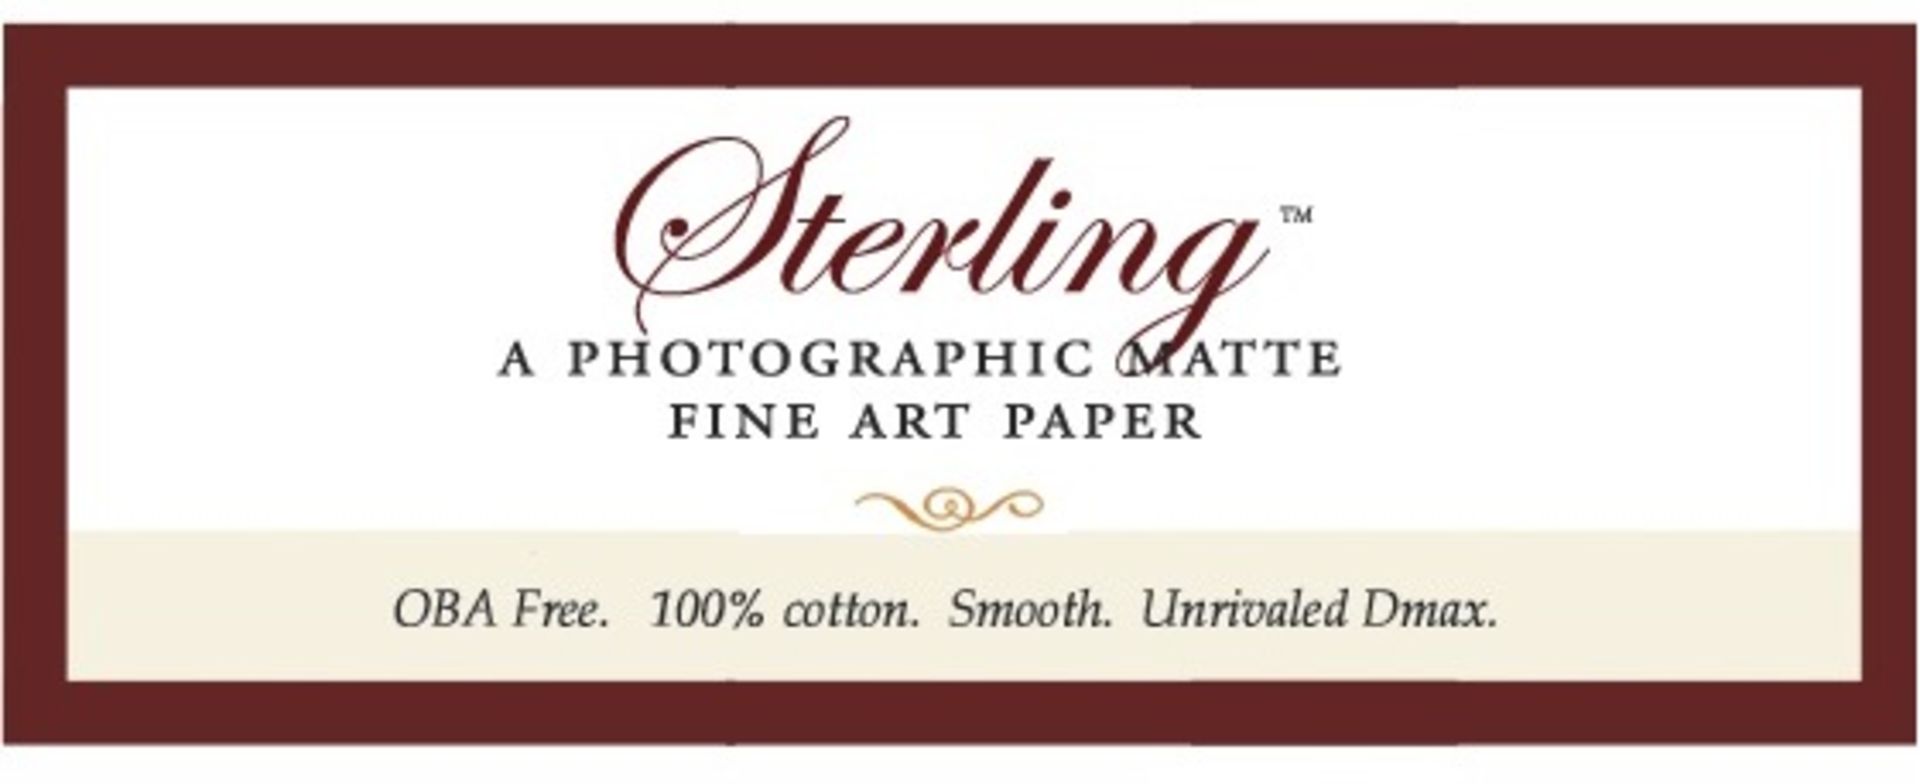 1 x Roll of Breathing Colour STERLING Photographic Matte Fine Art Paper - Size 17" x 50' - 250gsm - - Image 5 of 5